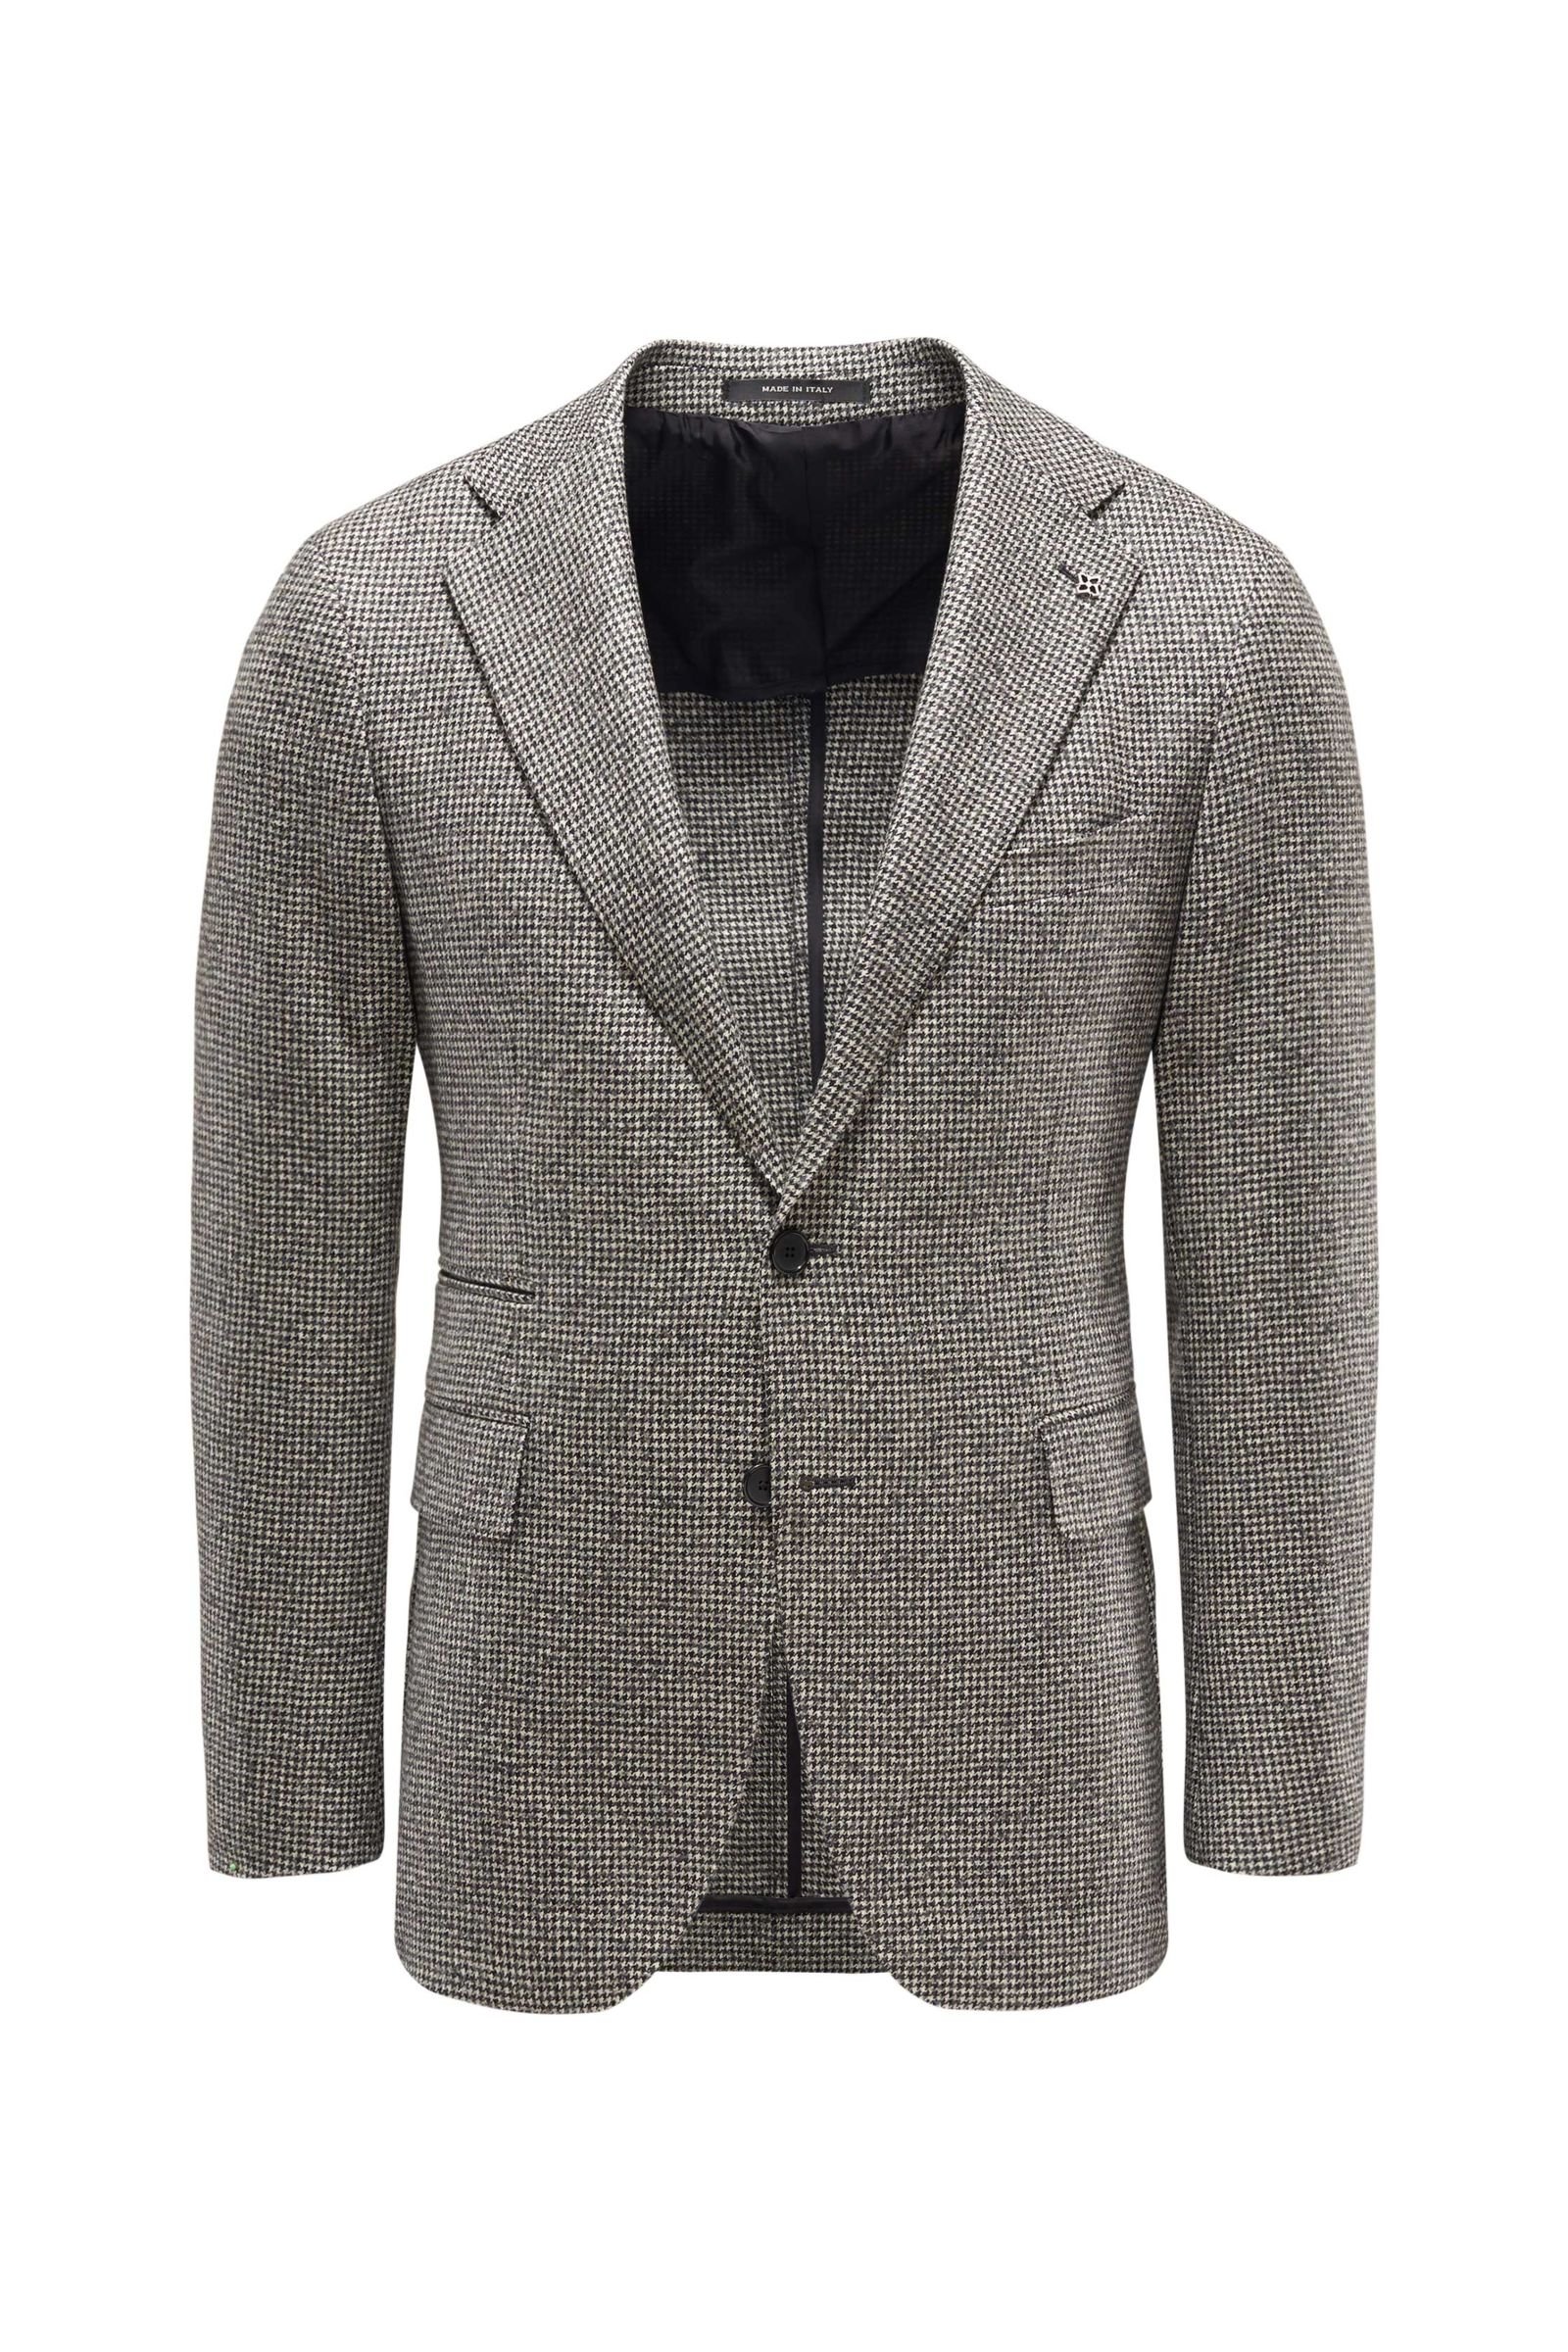 Smart-casual jacket anthracite/white checked